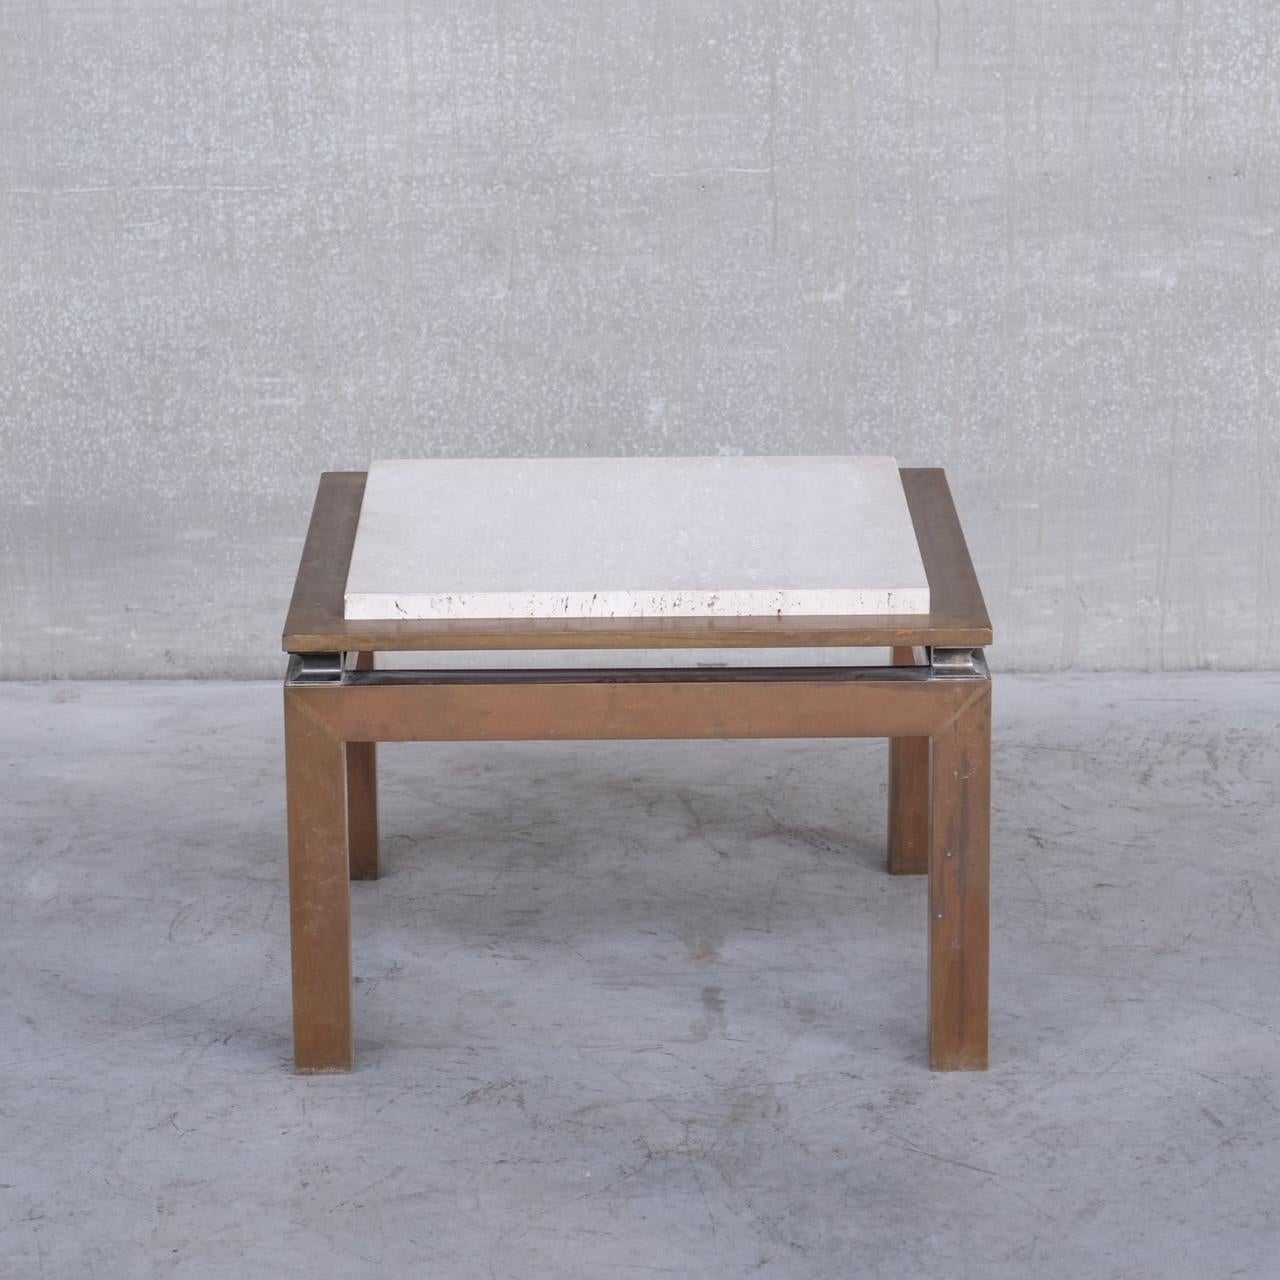 A small coffee table or side table. 

France, c1960s. 

Naturally patinated brass and travertine top, providing a pleasing contrast of tones. 

Good condition, some scuffs and wear commensurate with age. 

Location: Belgium